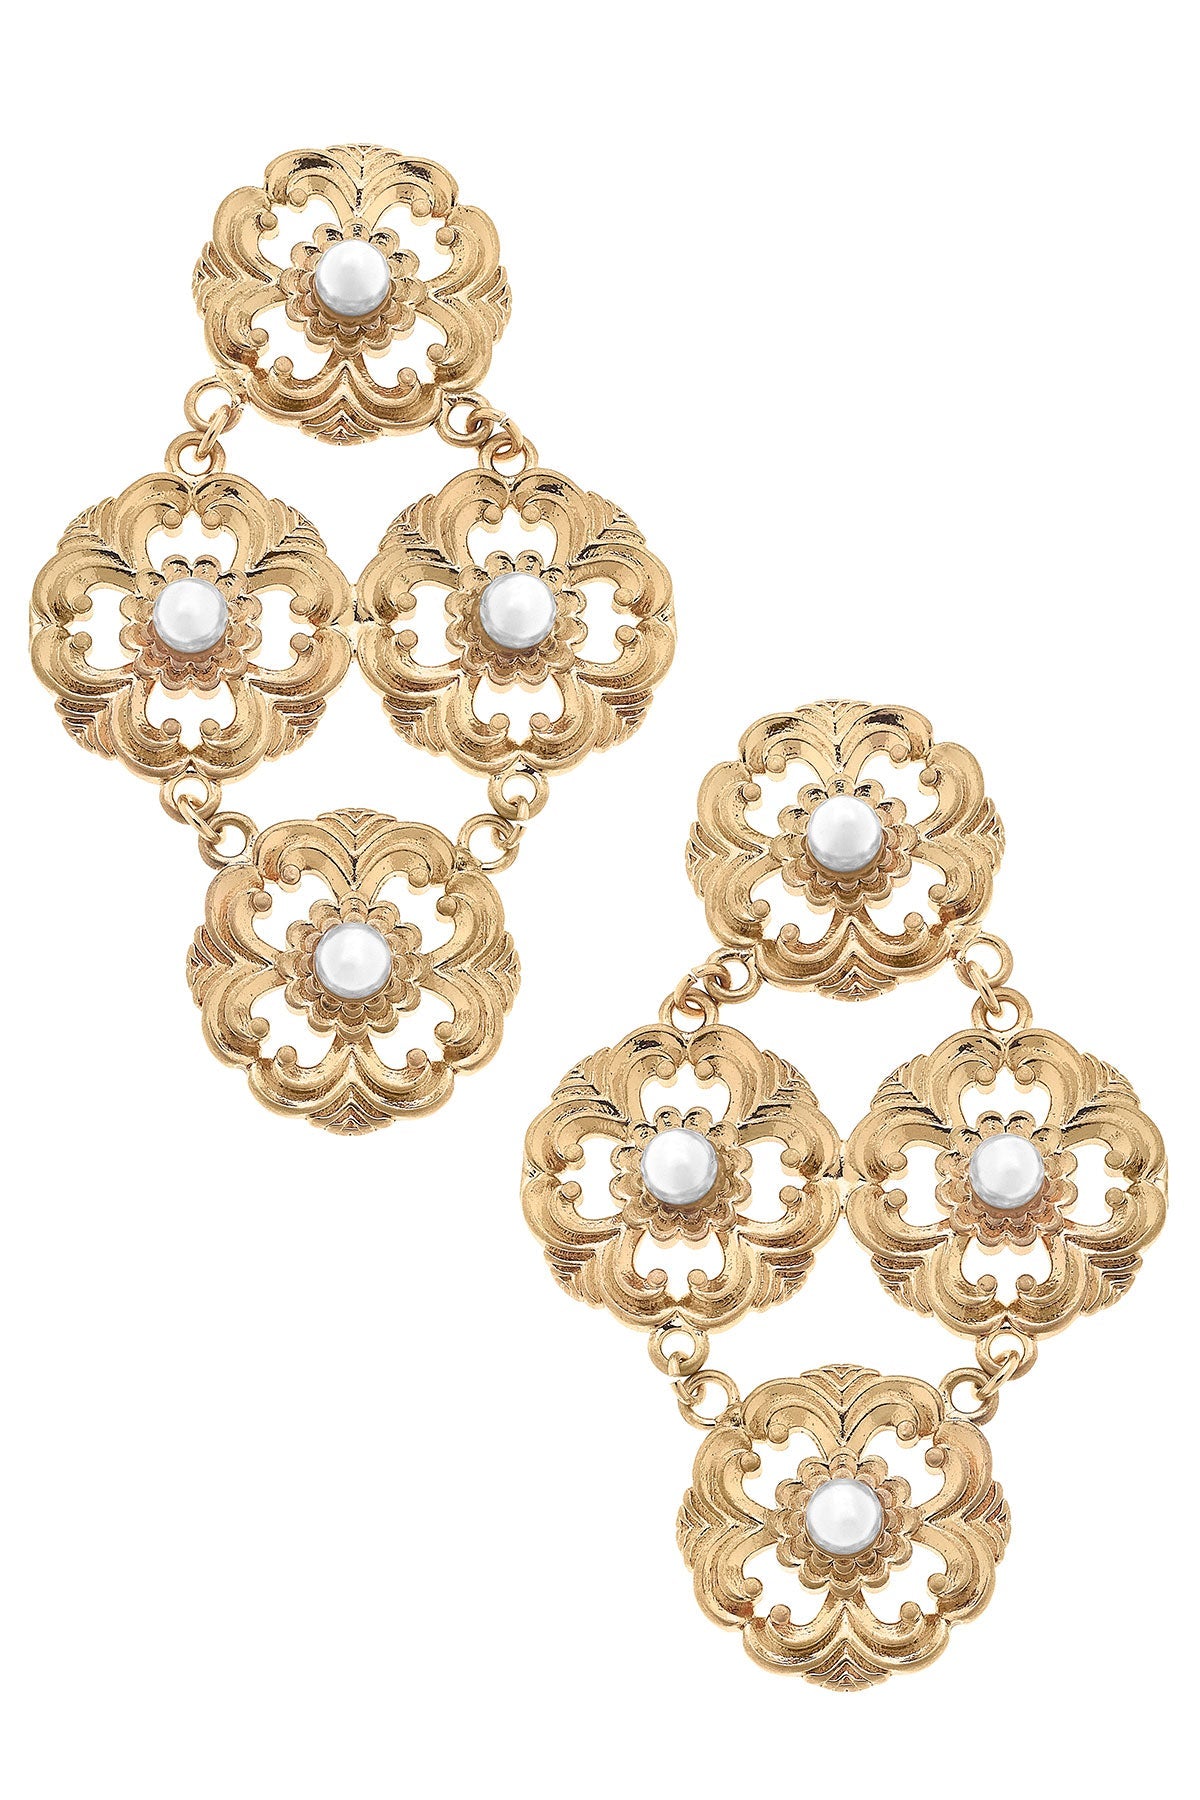 Orleans Acanthus & Pearl Chandelier Earrings in Worn Gold by CANVAS